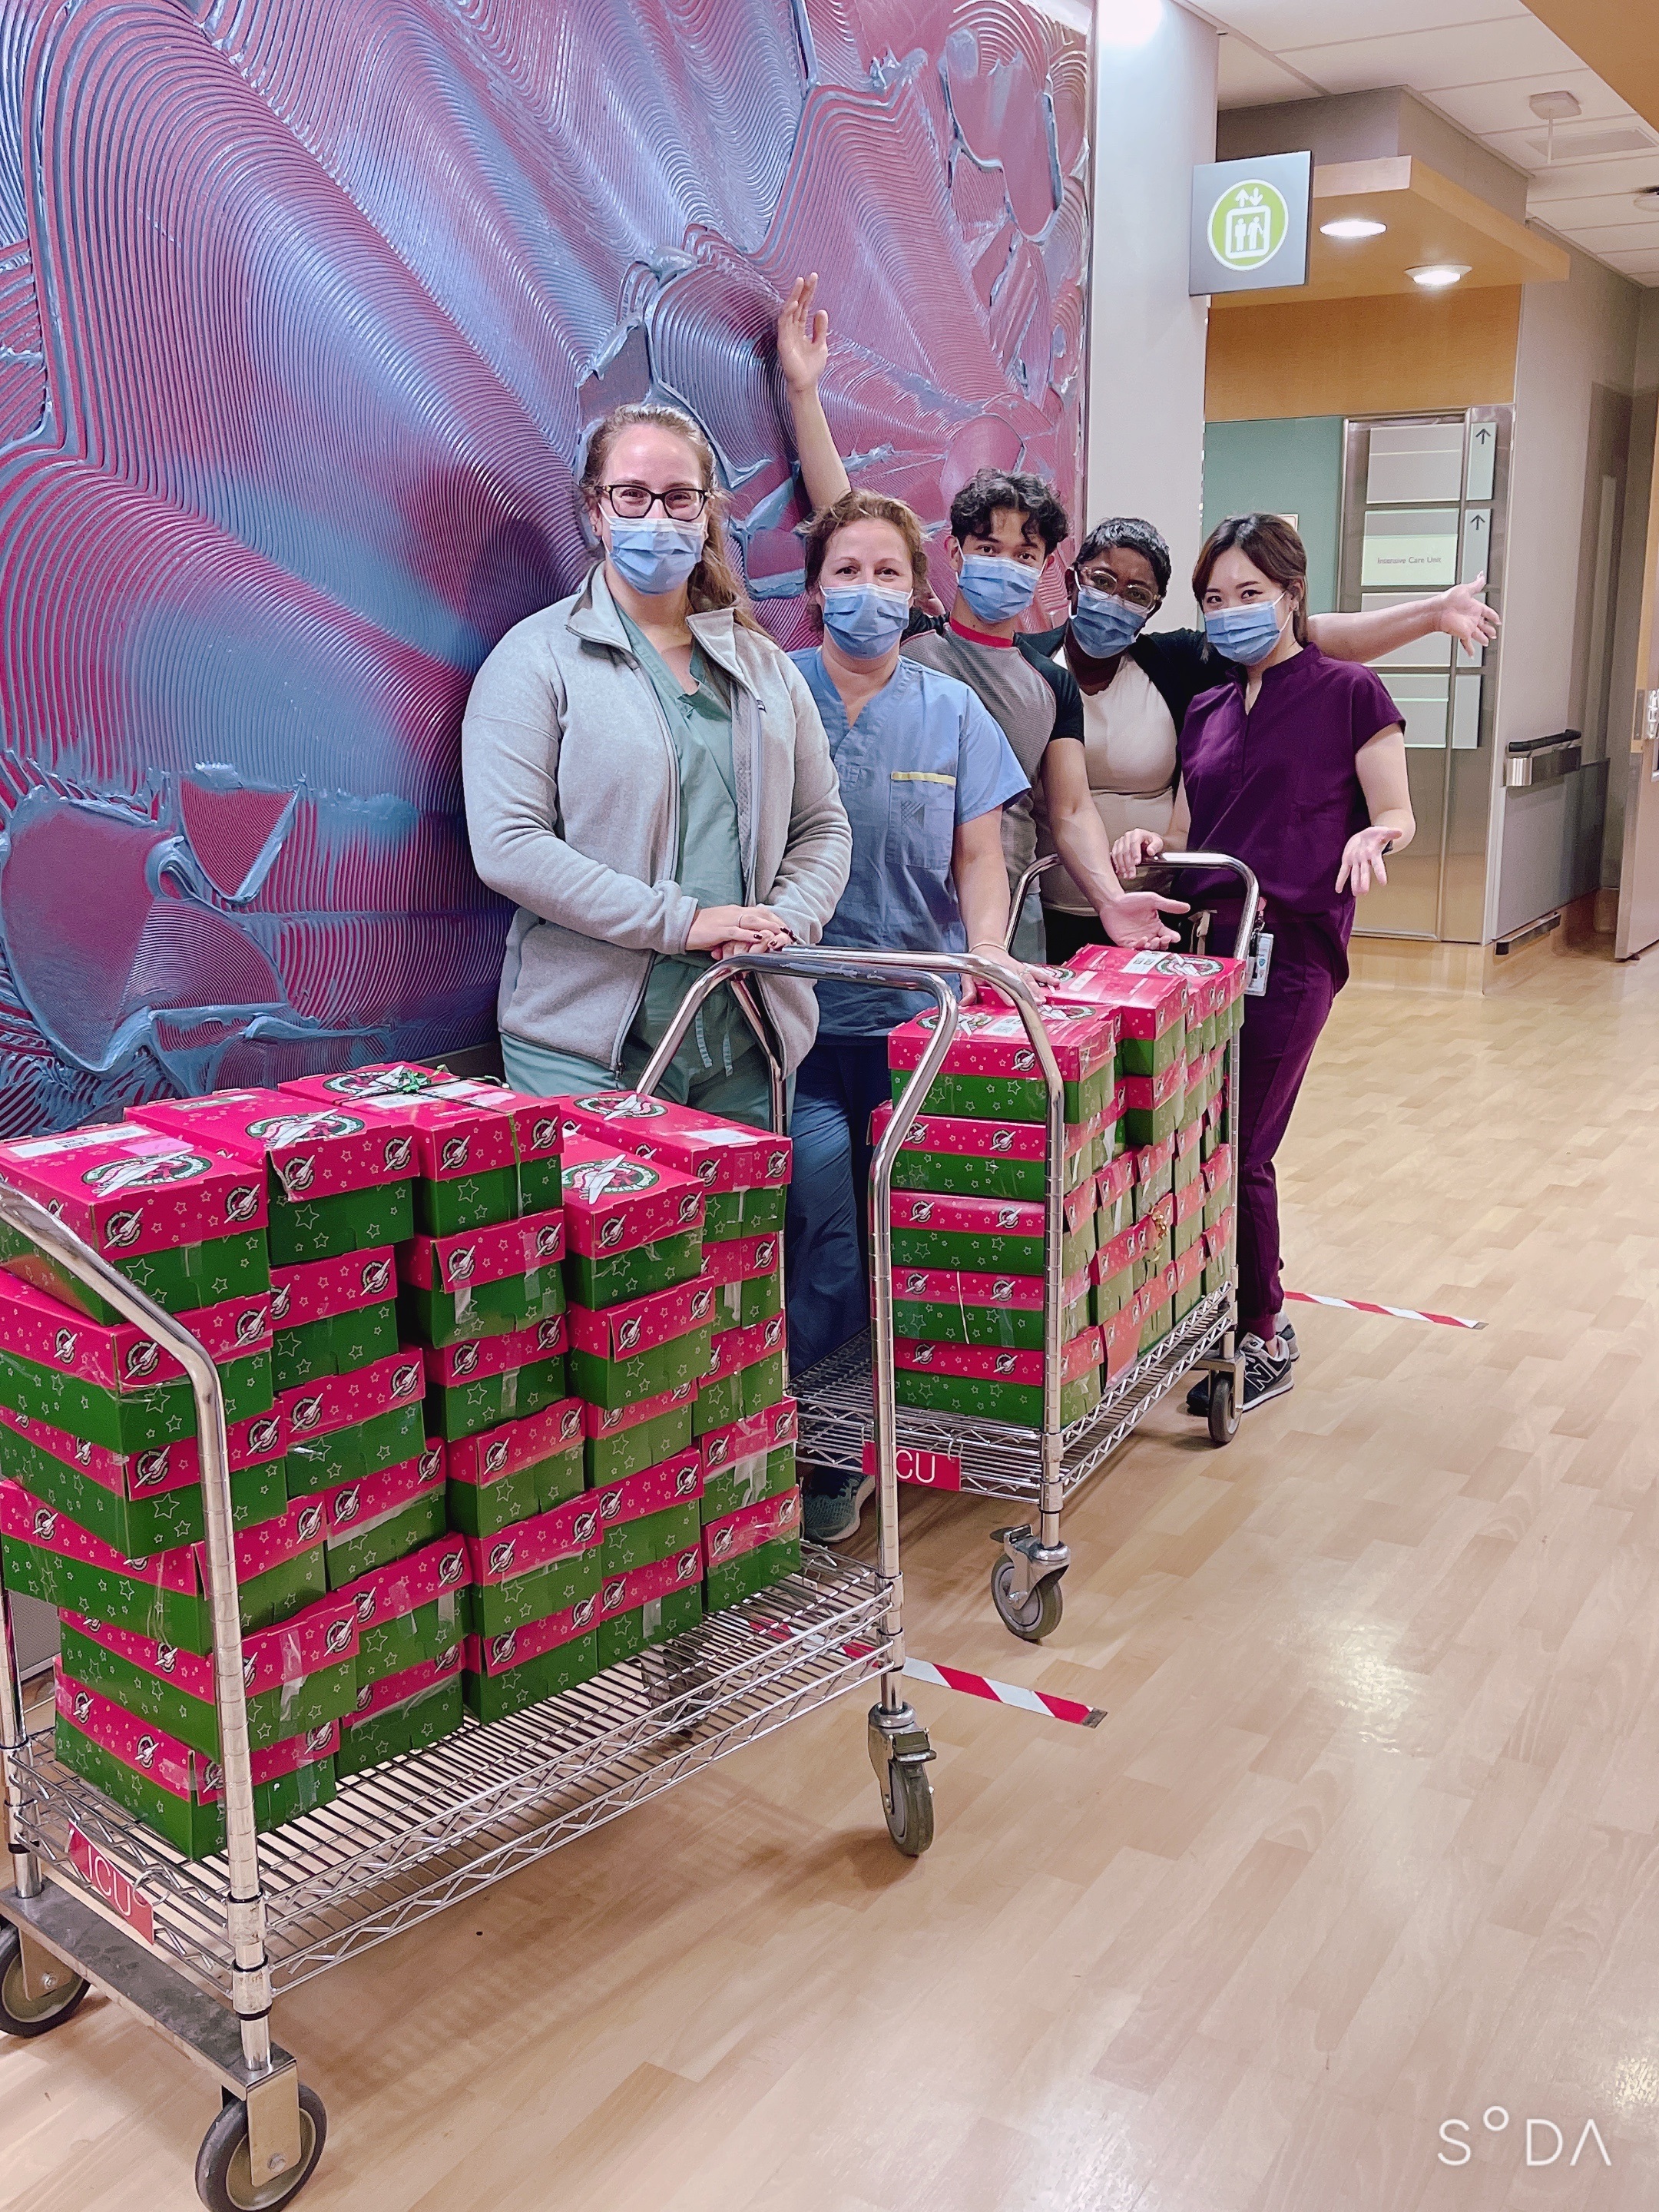 A group of five health care workers in a hallway in a hospital. they are standing next to two carts that each contain a large stack of gift wrapped shoe boxes neatly stacked. There are almost thirty shoe boxes on one cart